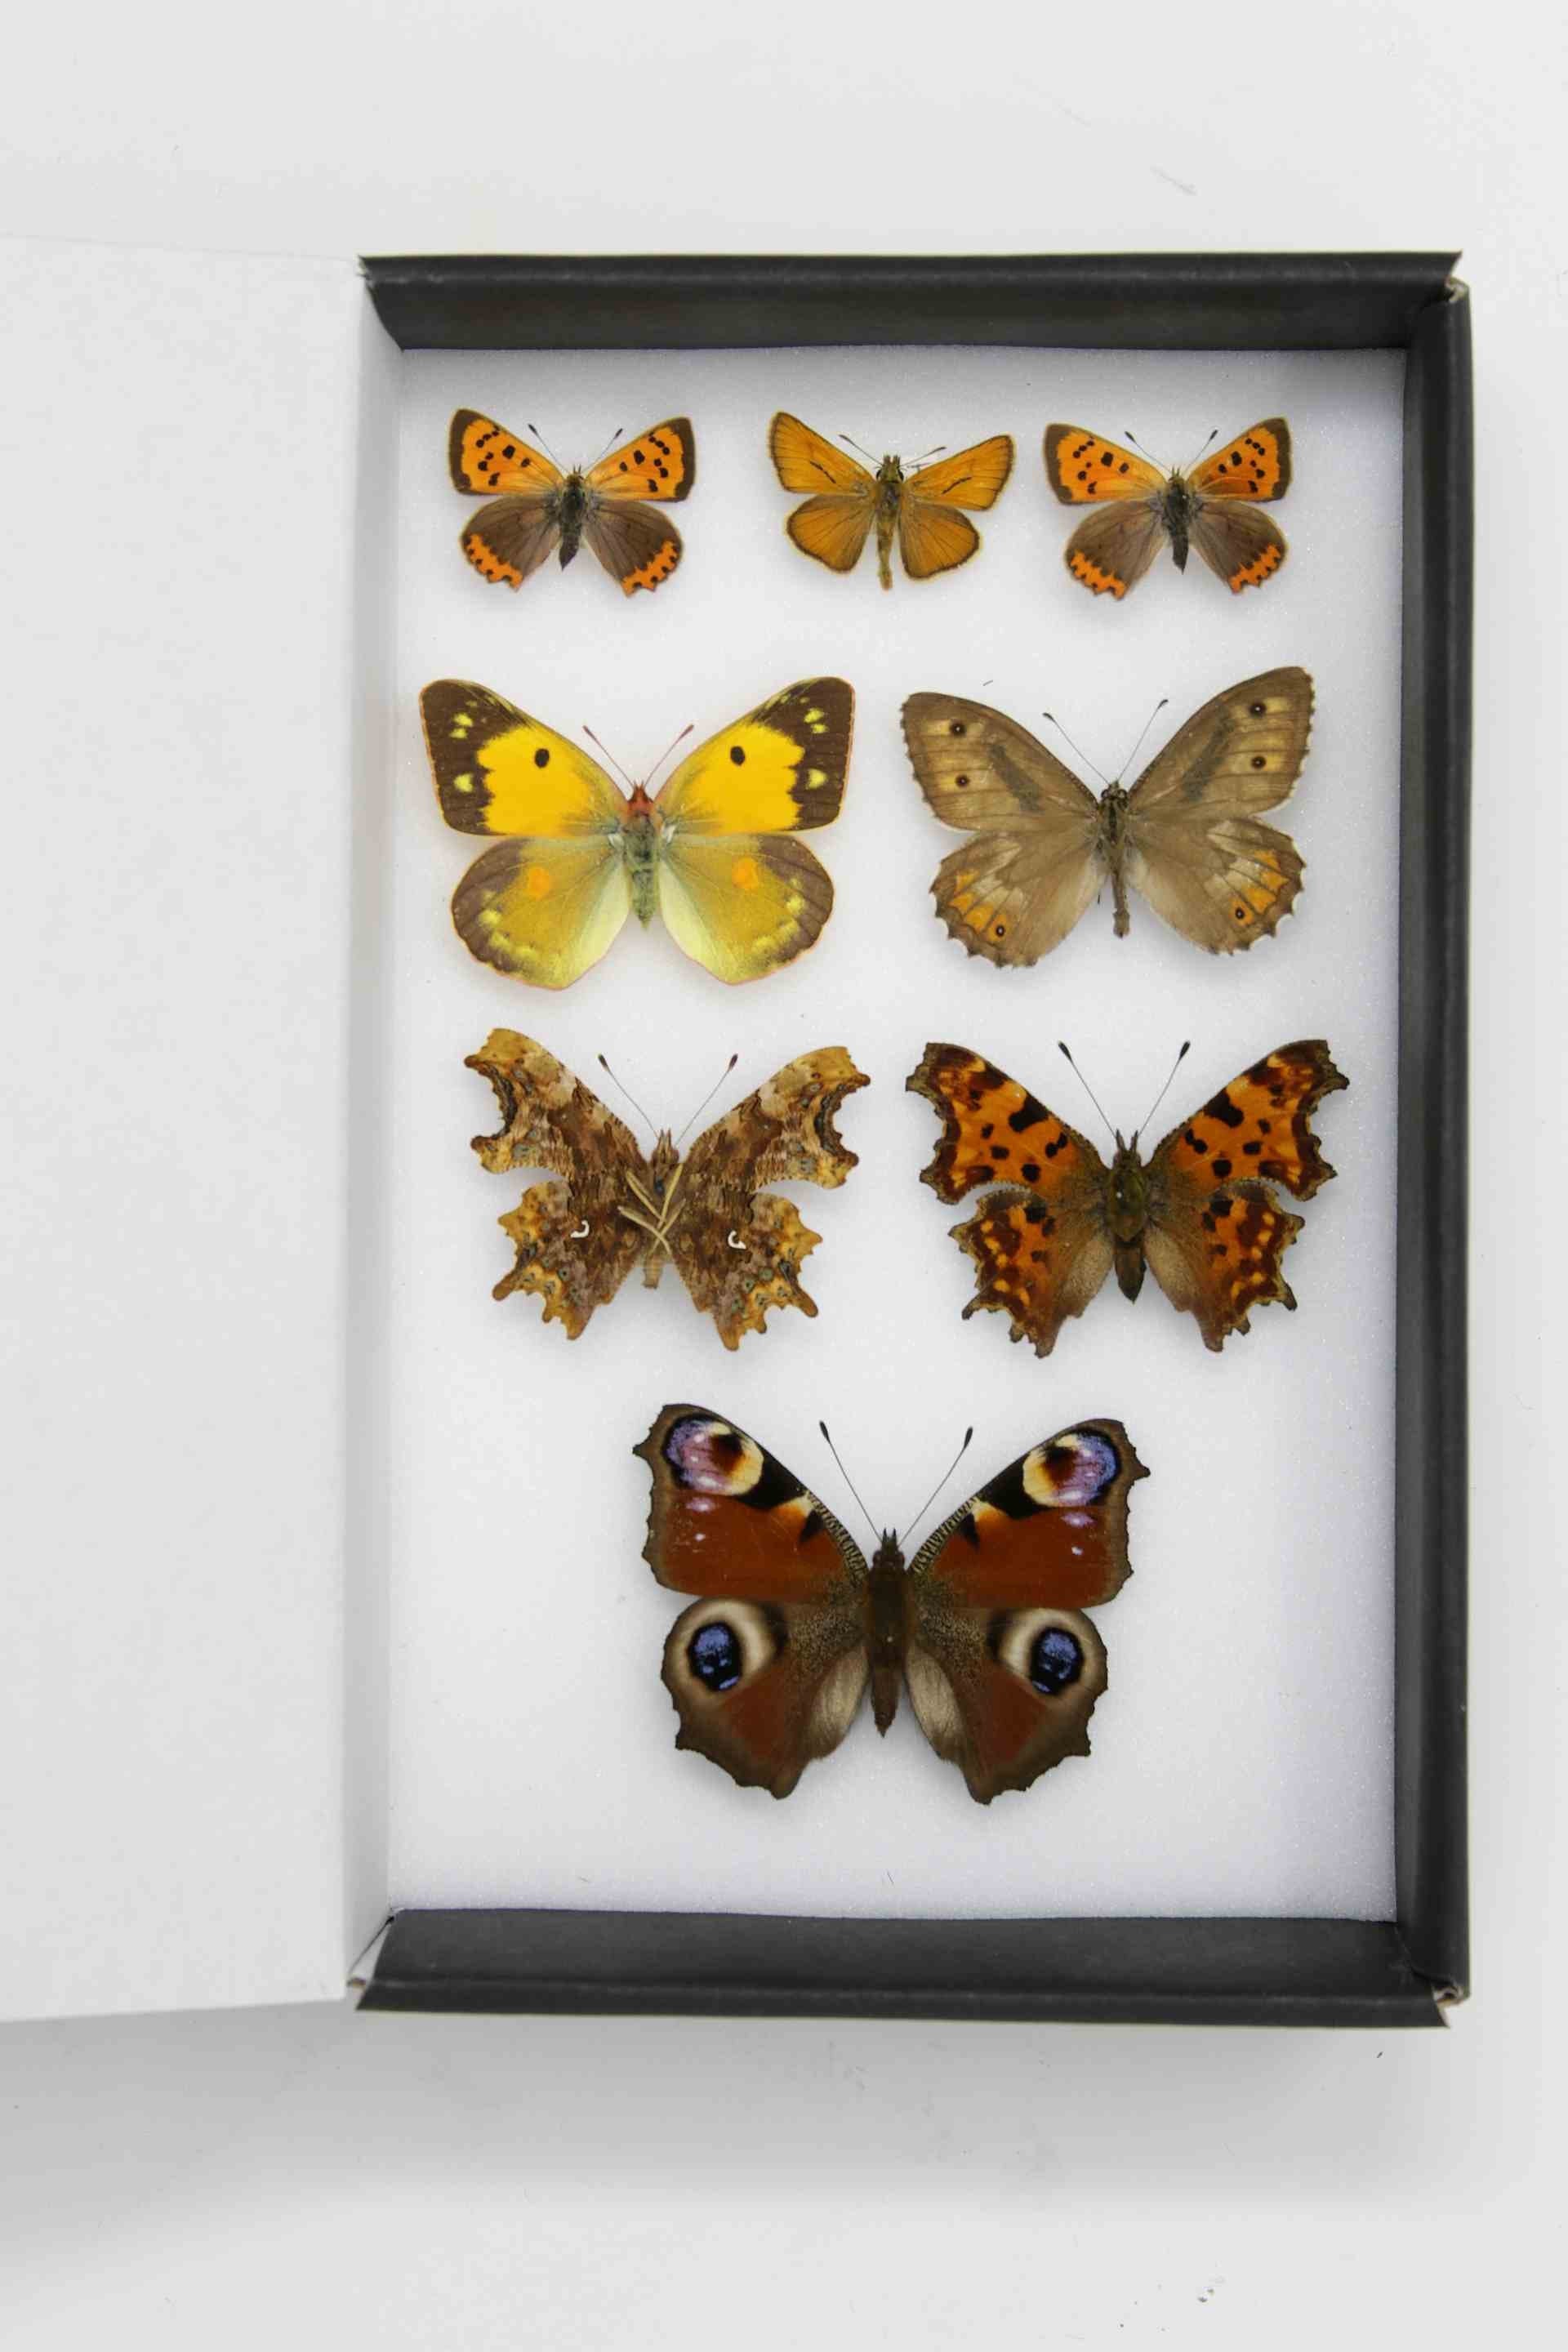 A Box of 8 Pinned British Butterflies, English Lepidoptera Collection | A1 Pinned Specimens